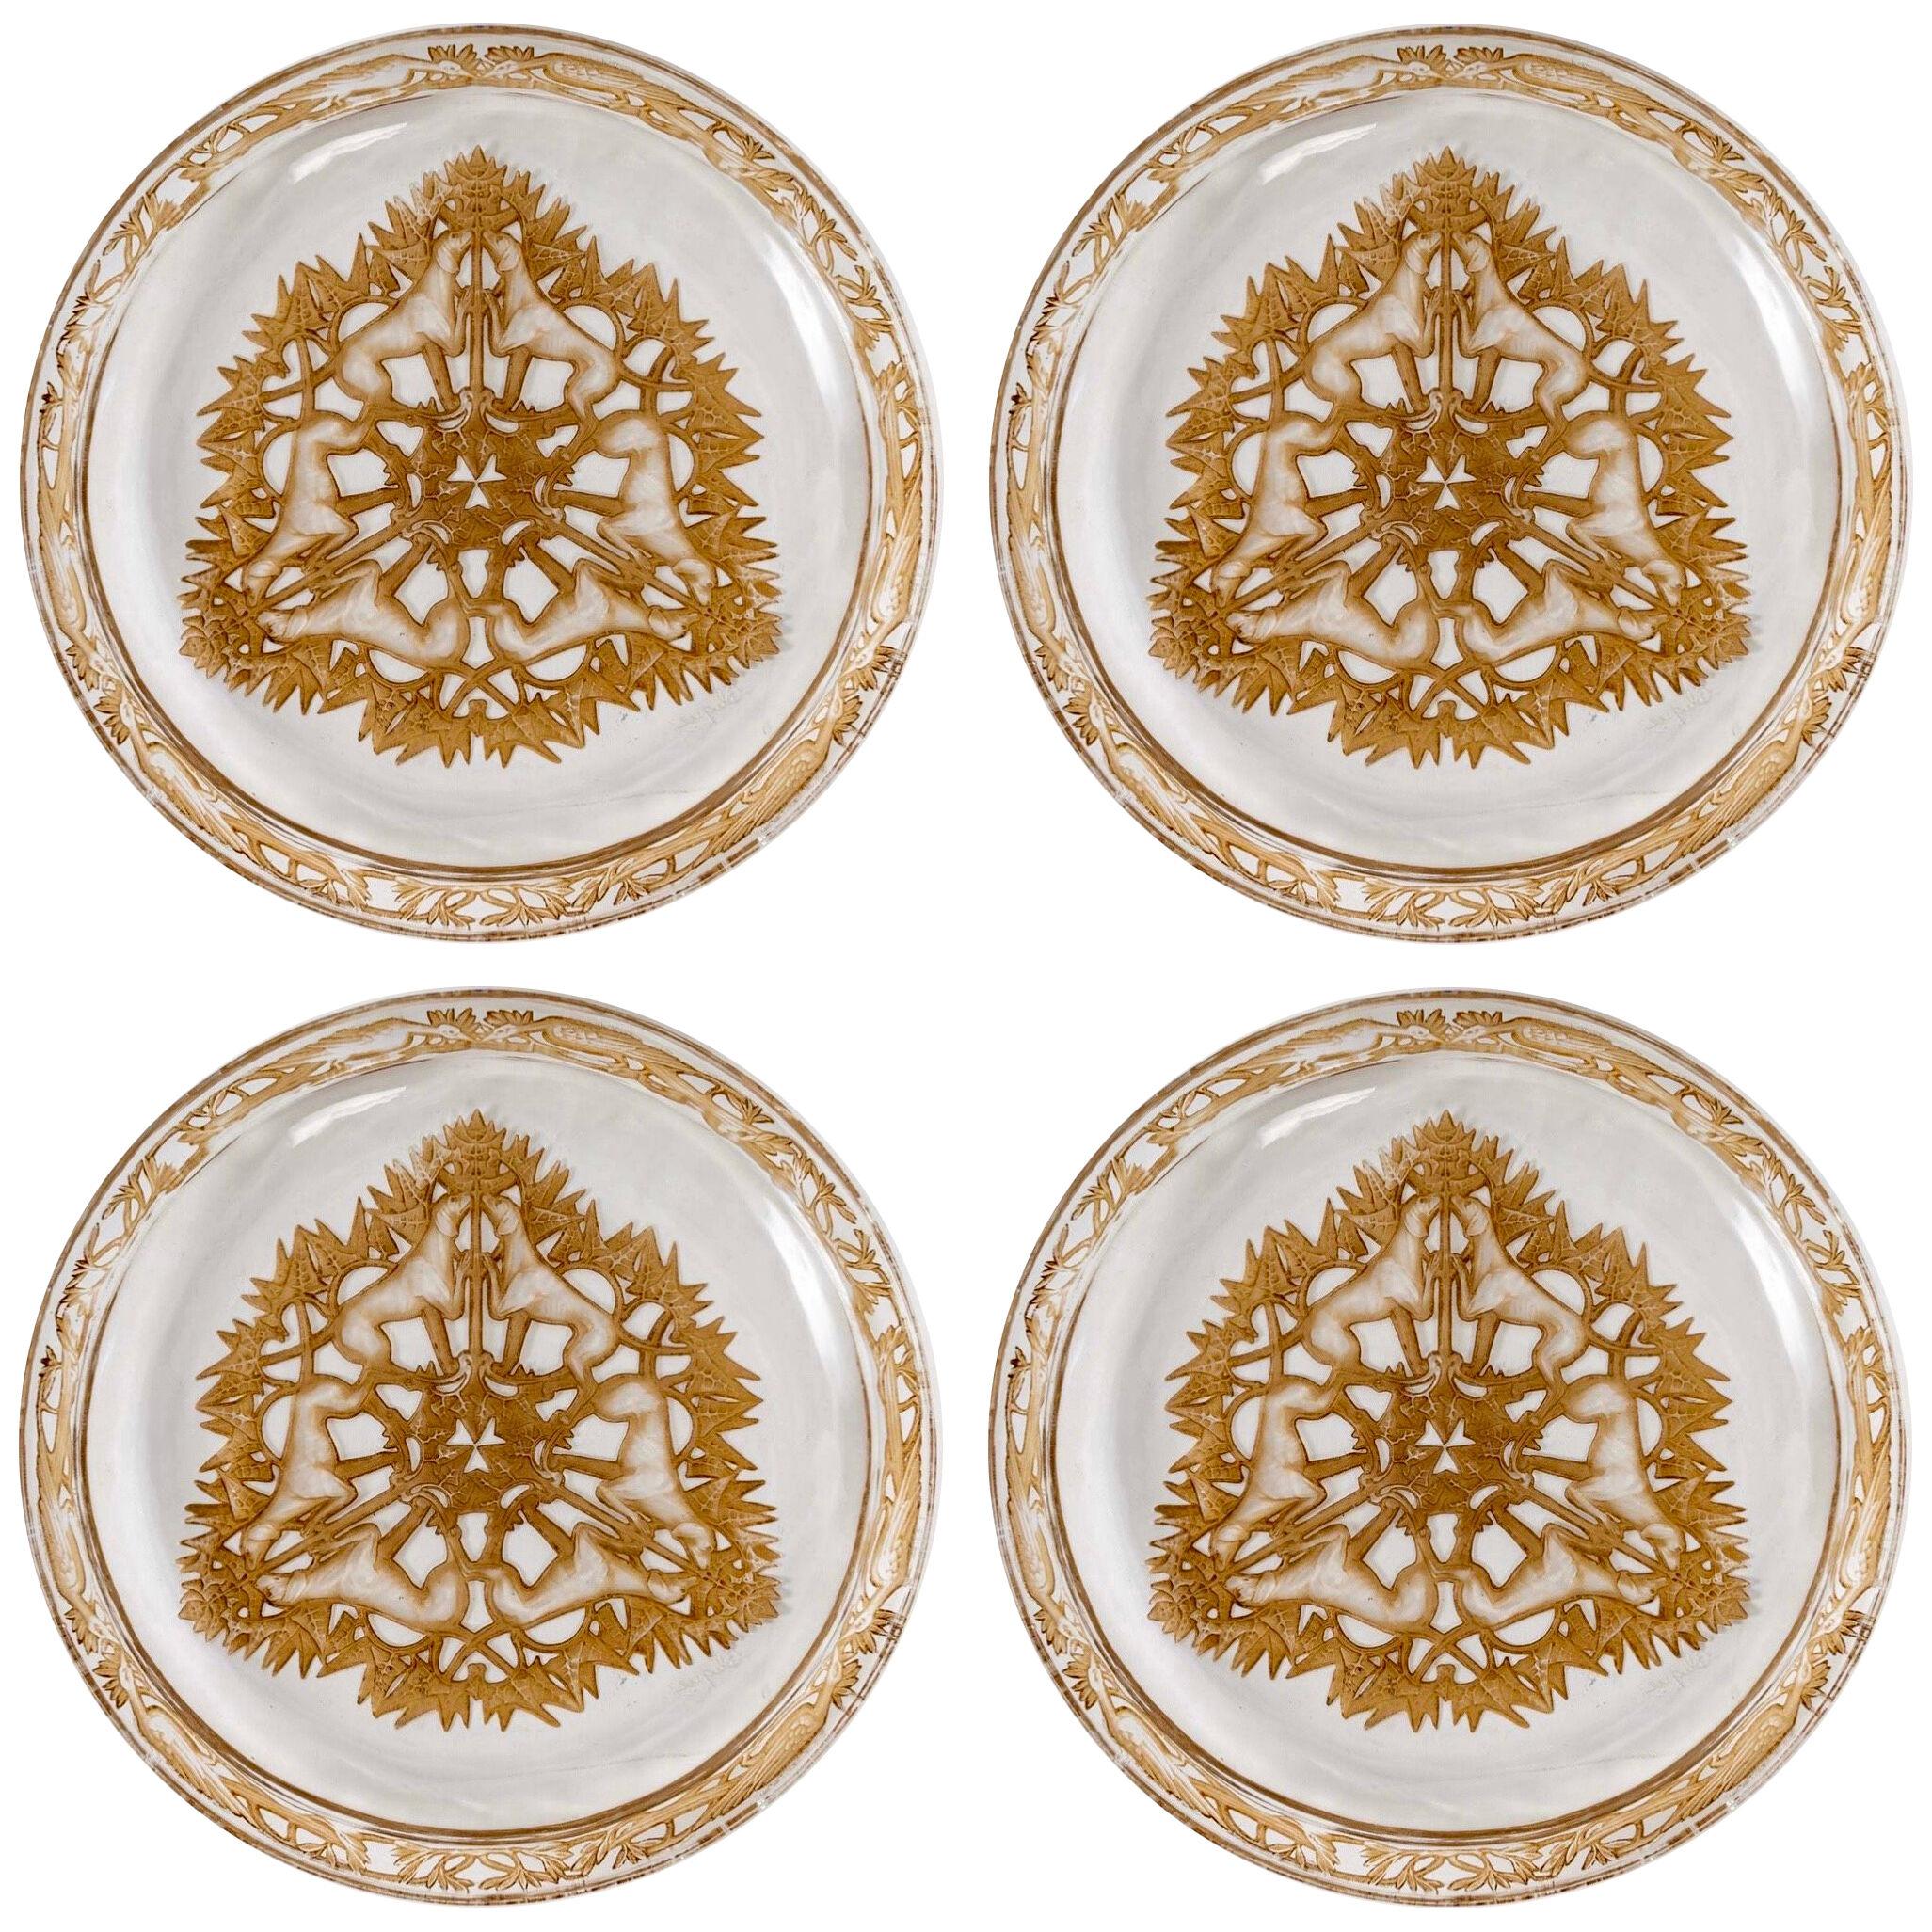 1914 René Lalique - Set of 4 Plates Dishes "Chasse Chiens" Glass Sepia Patina